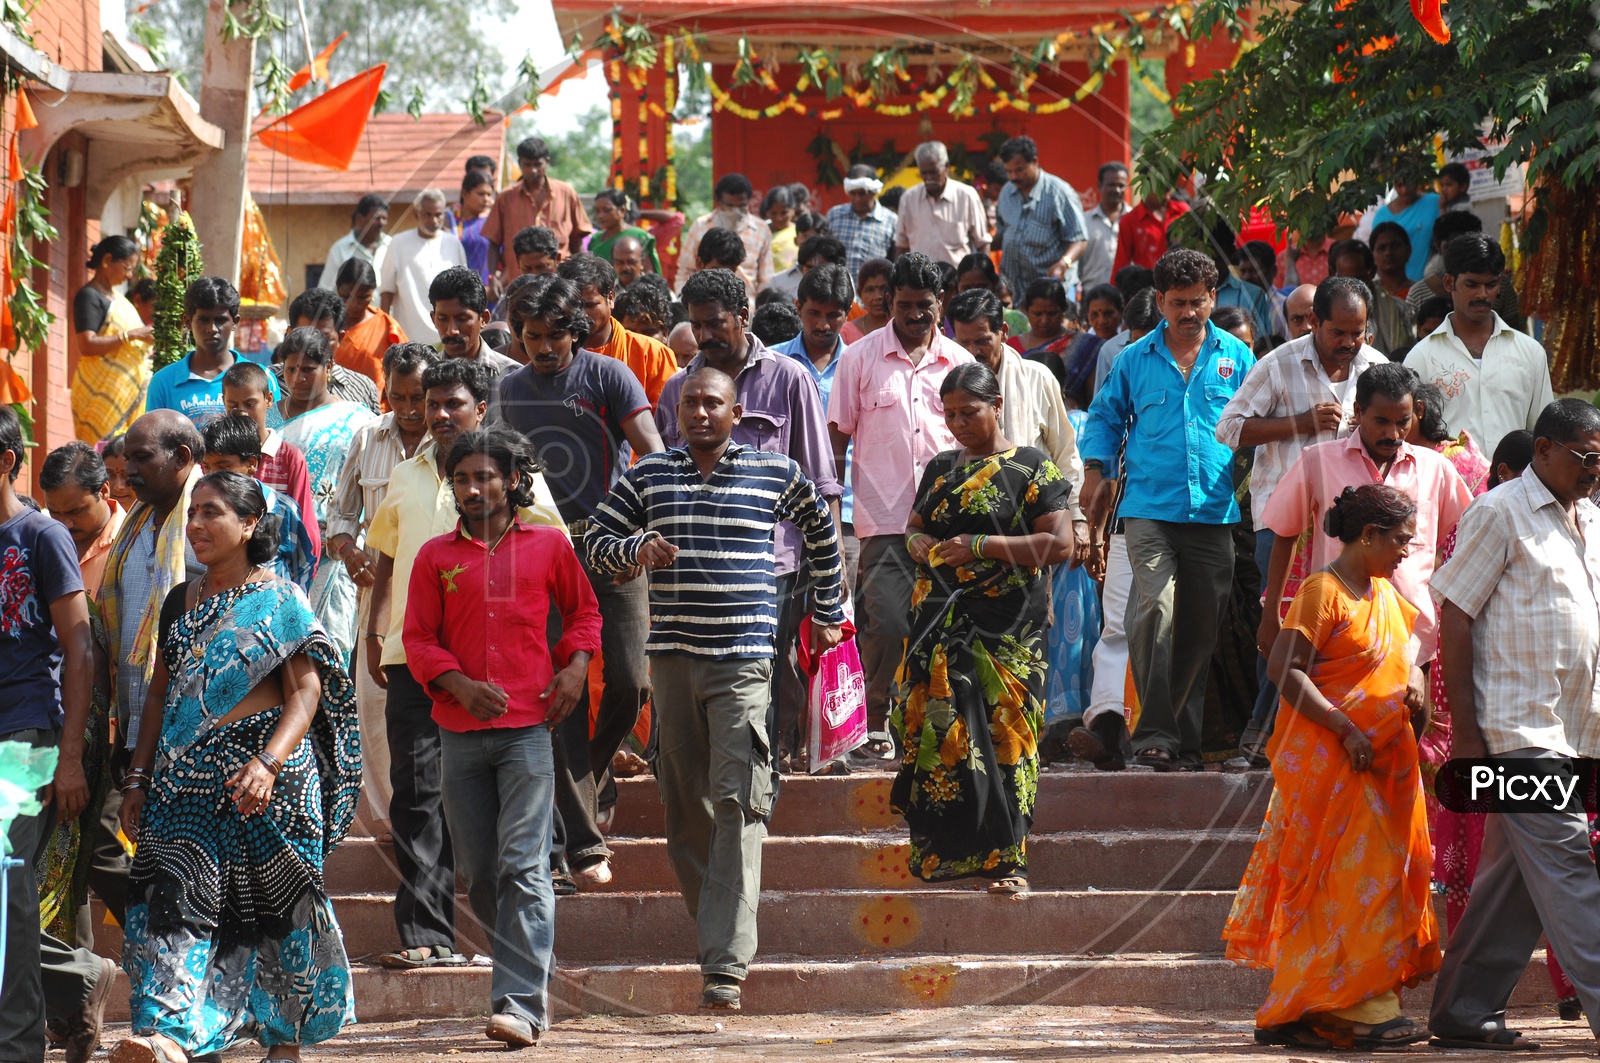 Exodus of People from a Temple